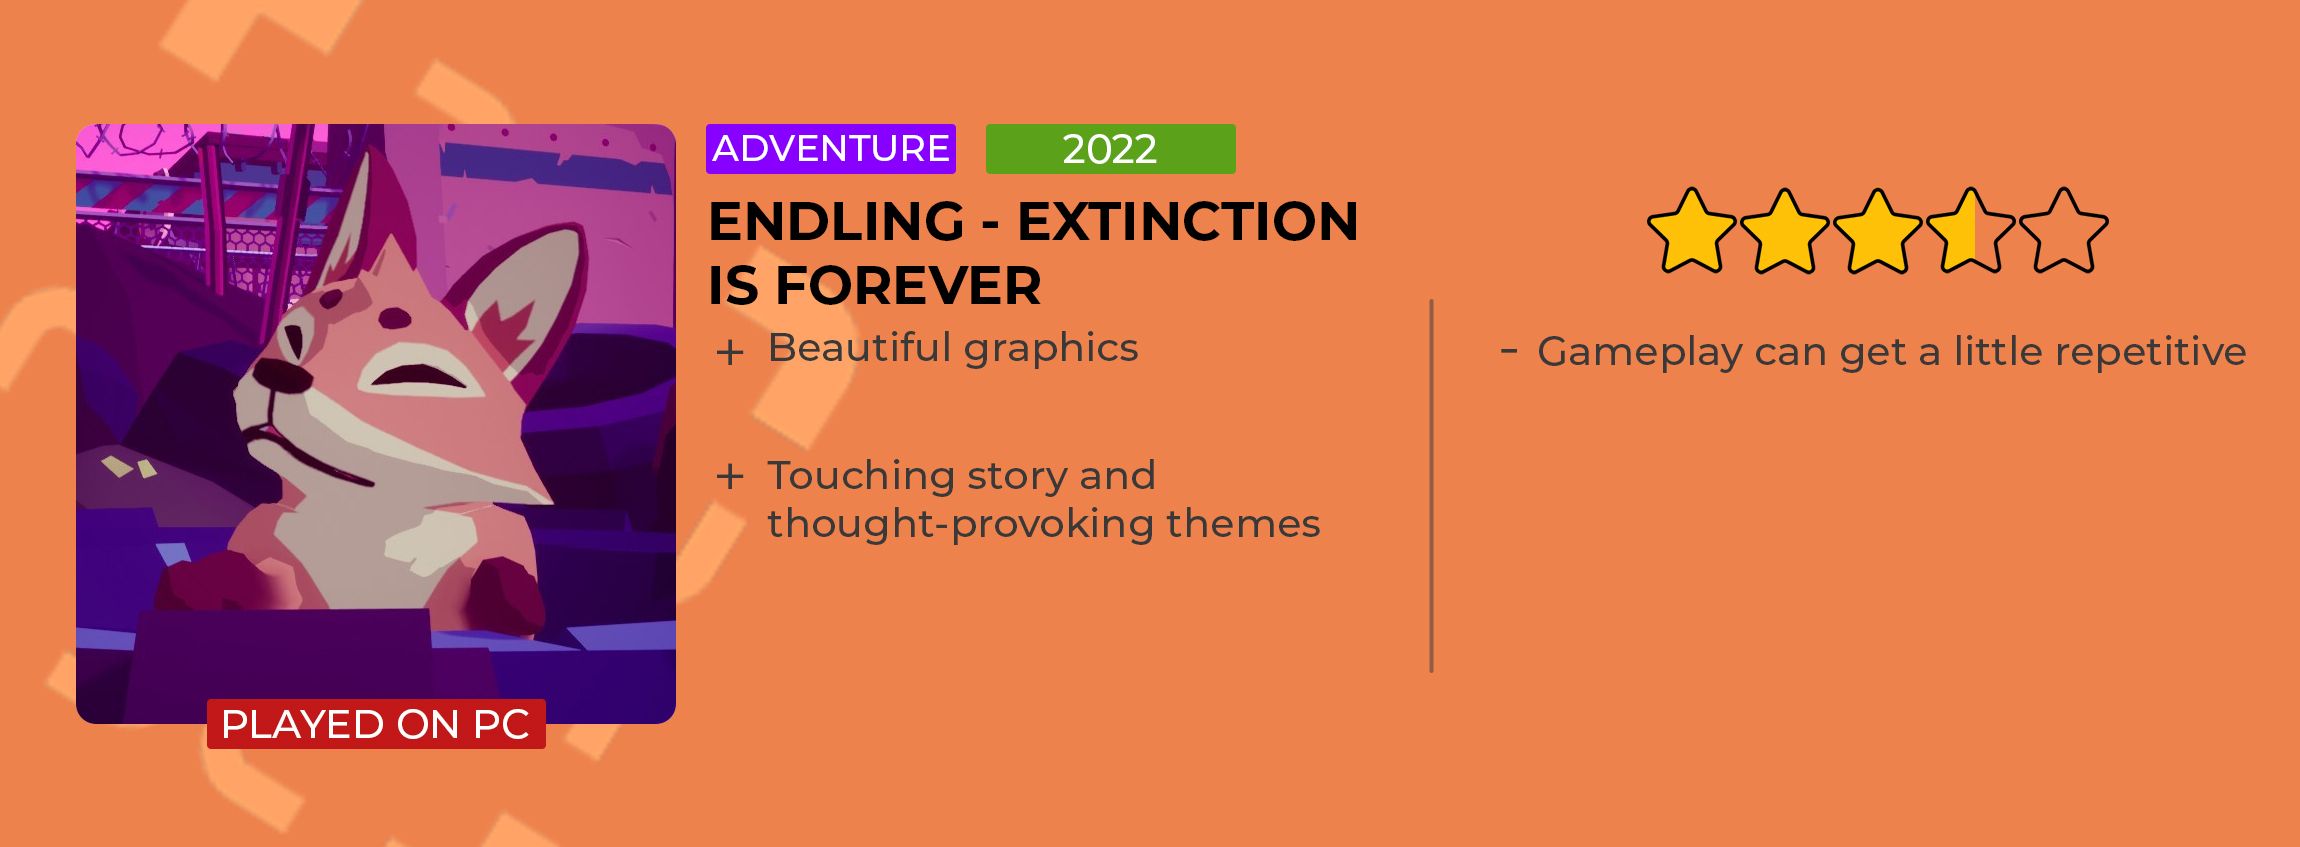 Endling - Extinction is Forever Review Card